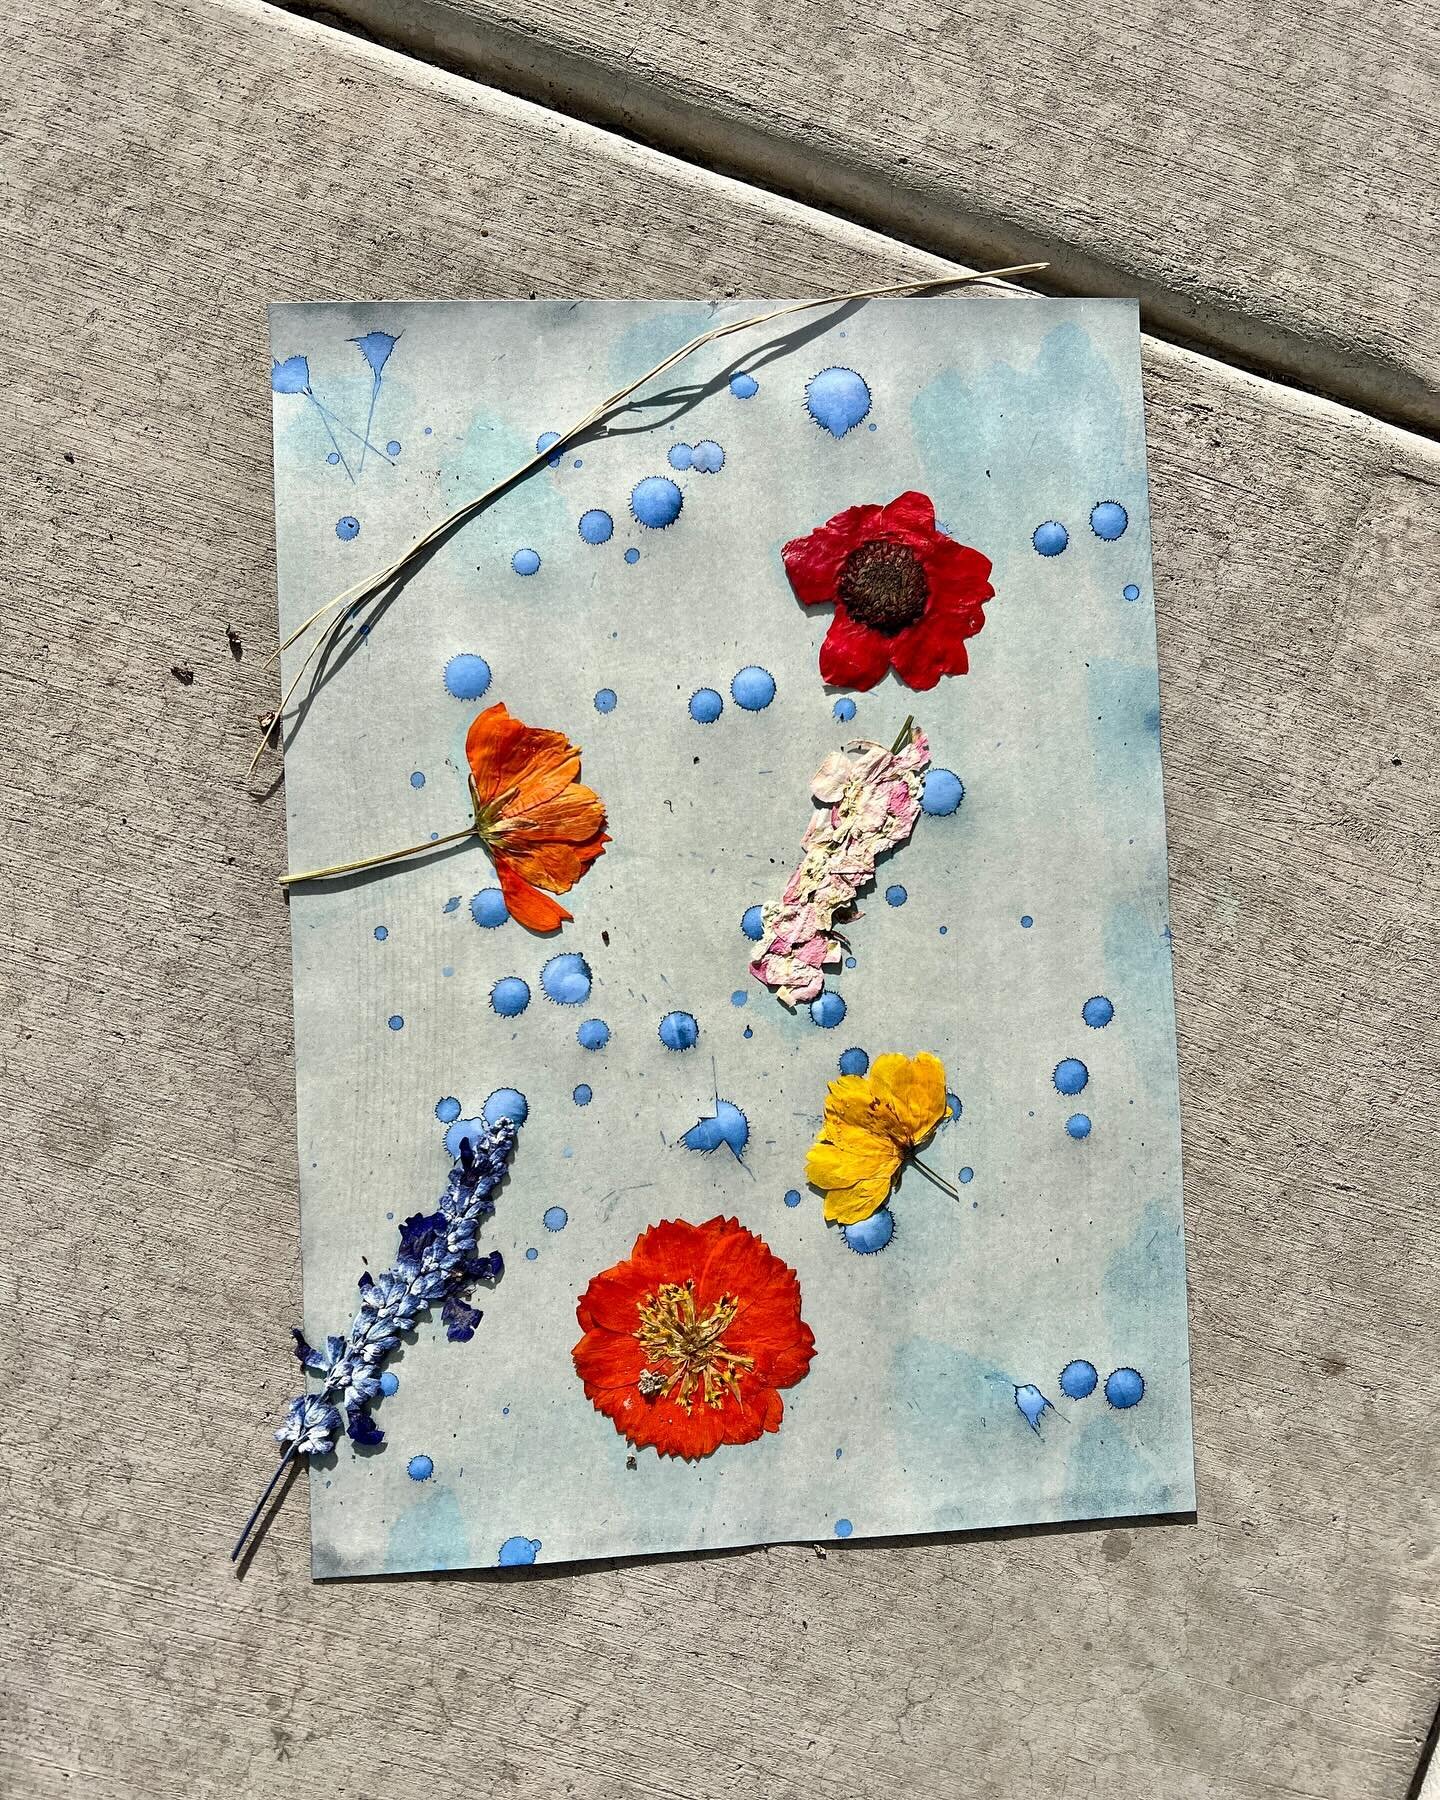 Lotsa firsts this week! Swipe to see how my cyanotype turned out after it started to sprinkle out 
🌼💙🪻💙🌺